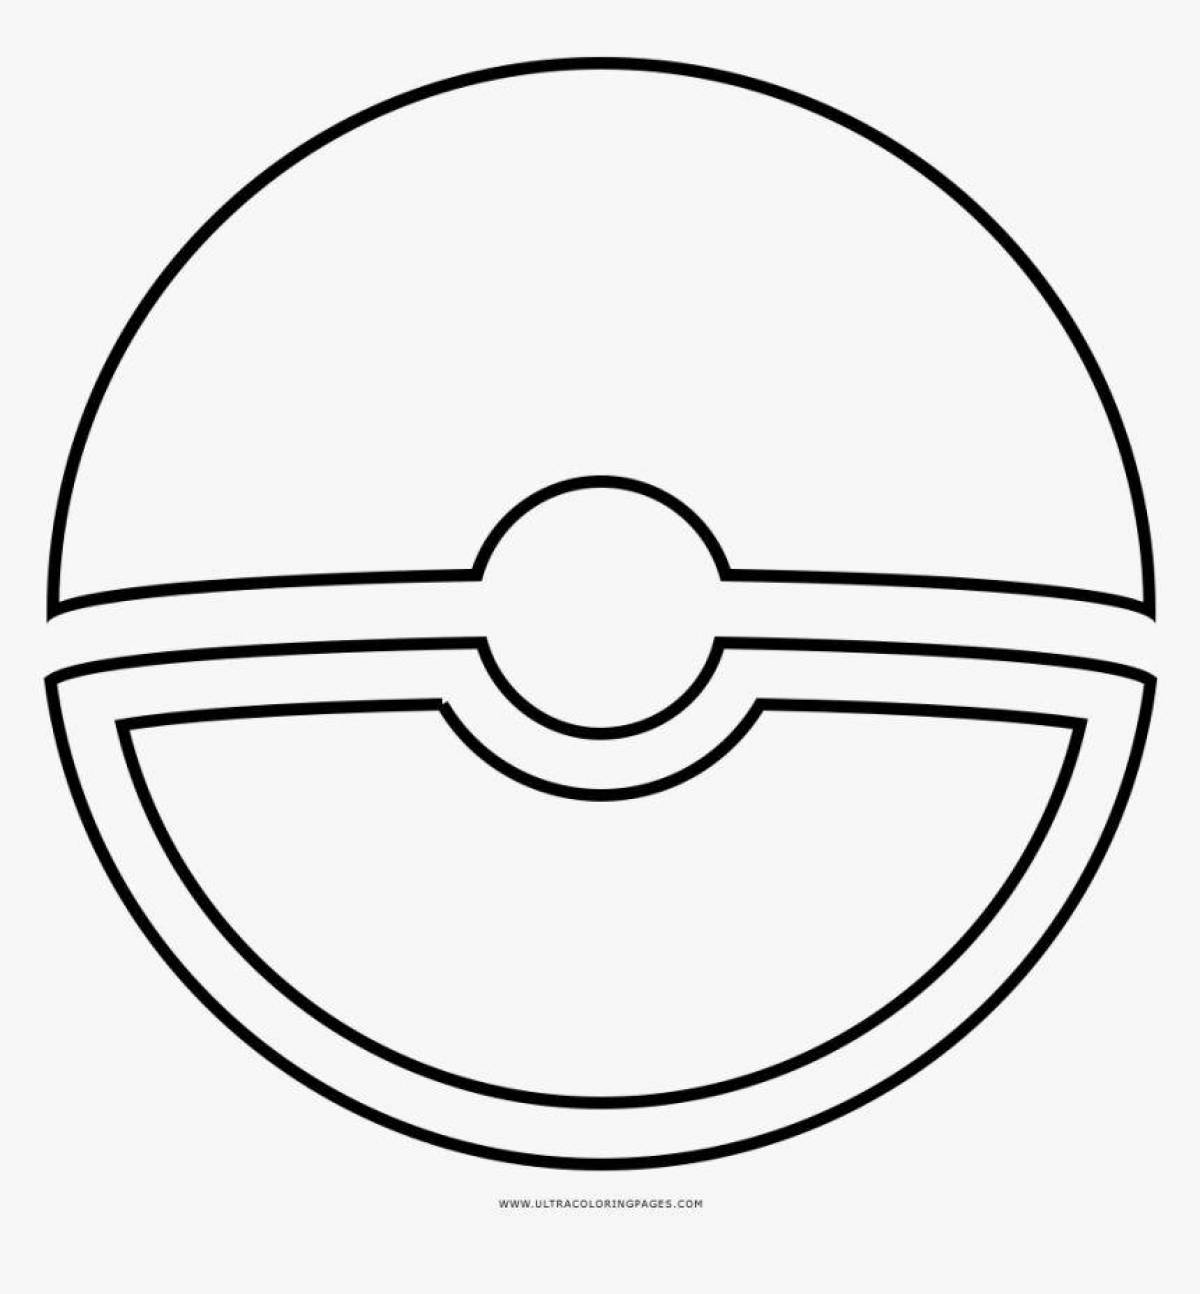 Pokeball colorful coloring page